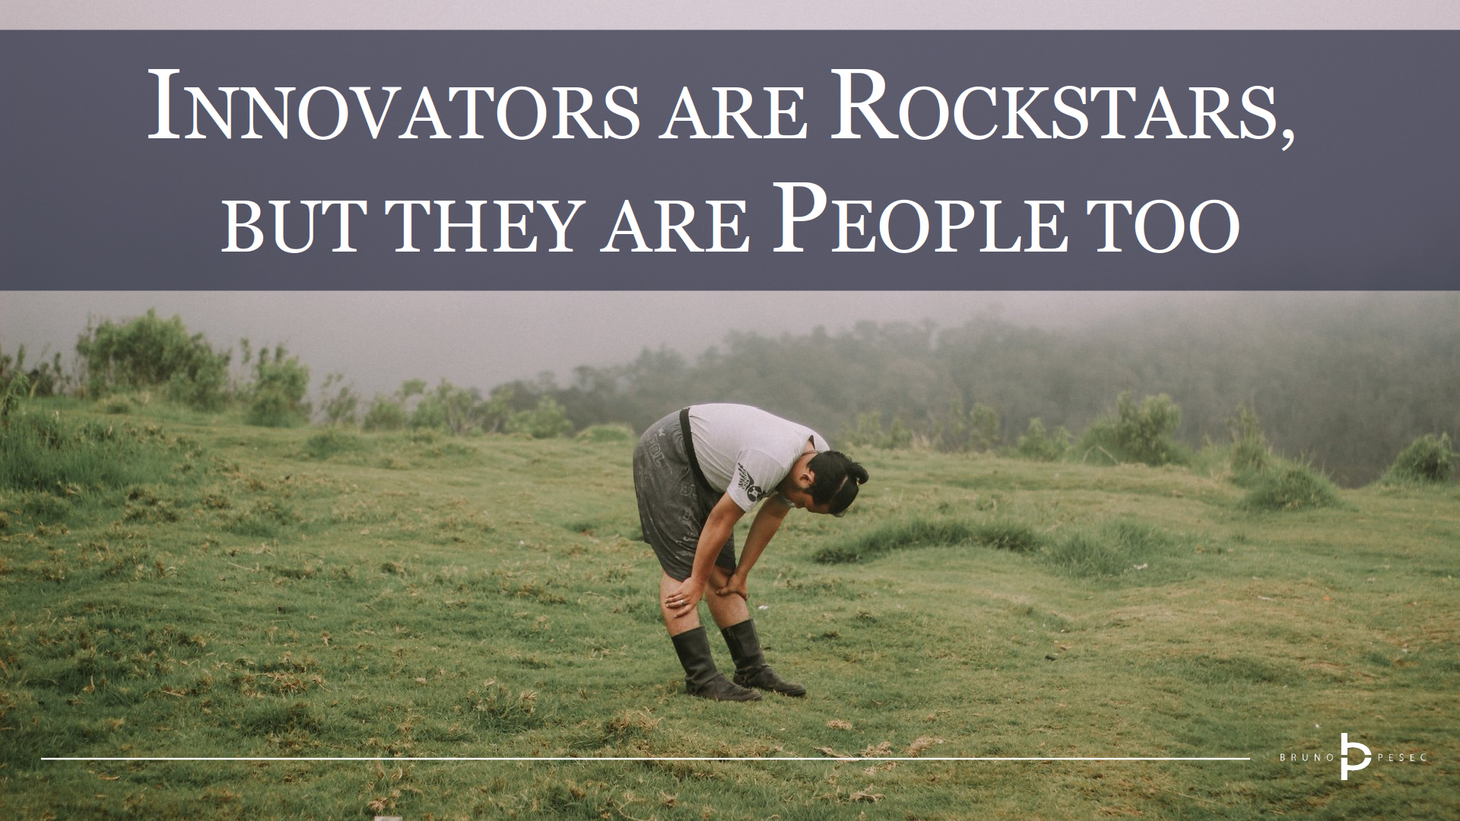 Innovators are rockstars, but they are people too!